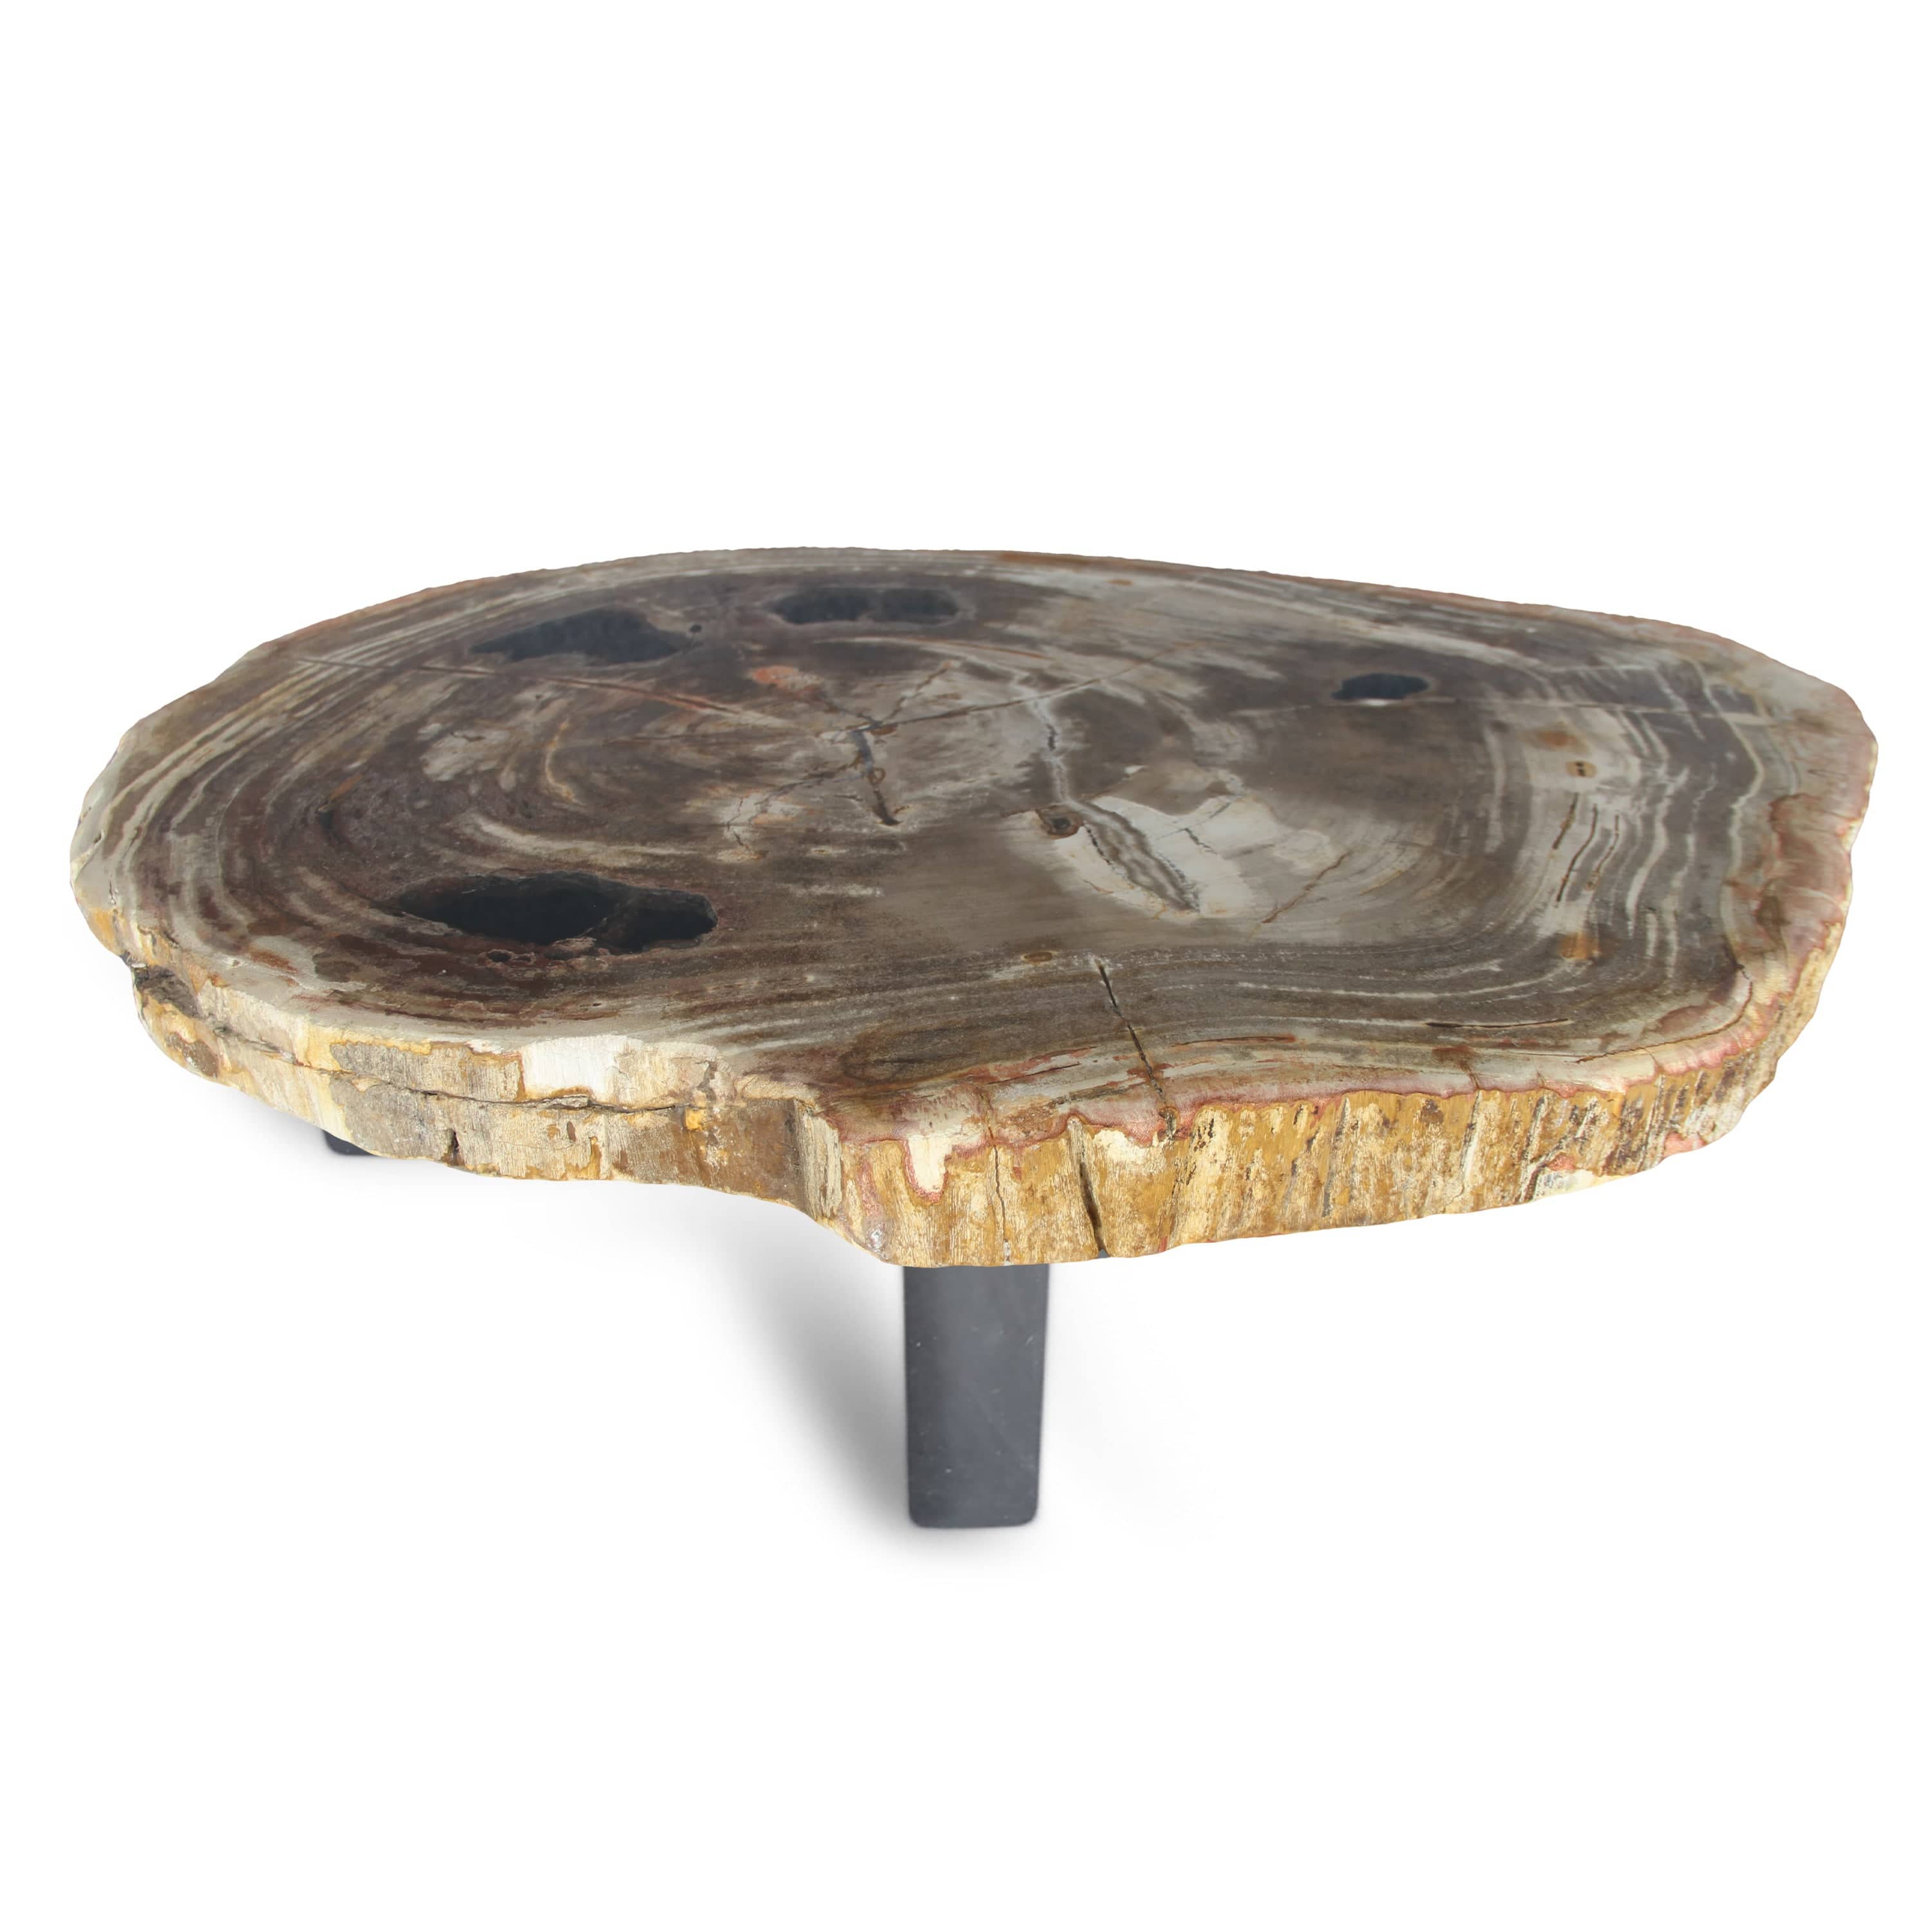 Kalifano Petrified Wood Petrified Wood Round Slab Coffee Table from Indonesia - 37" / 165 lbs PWT6000.003